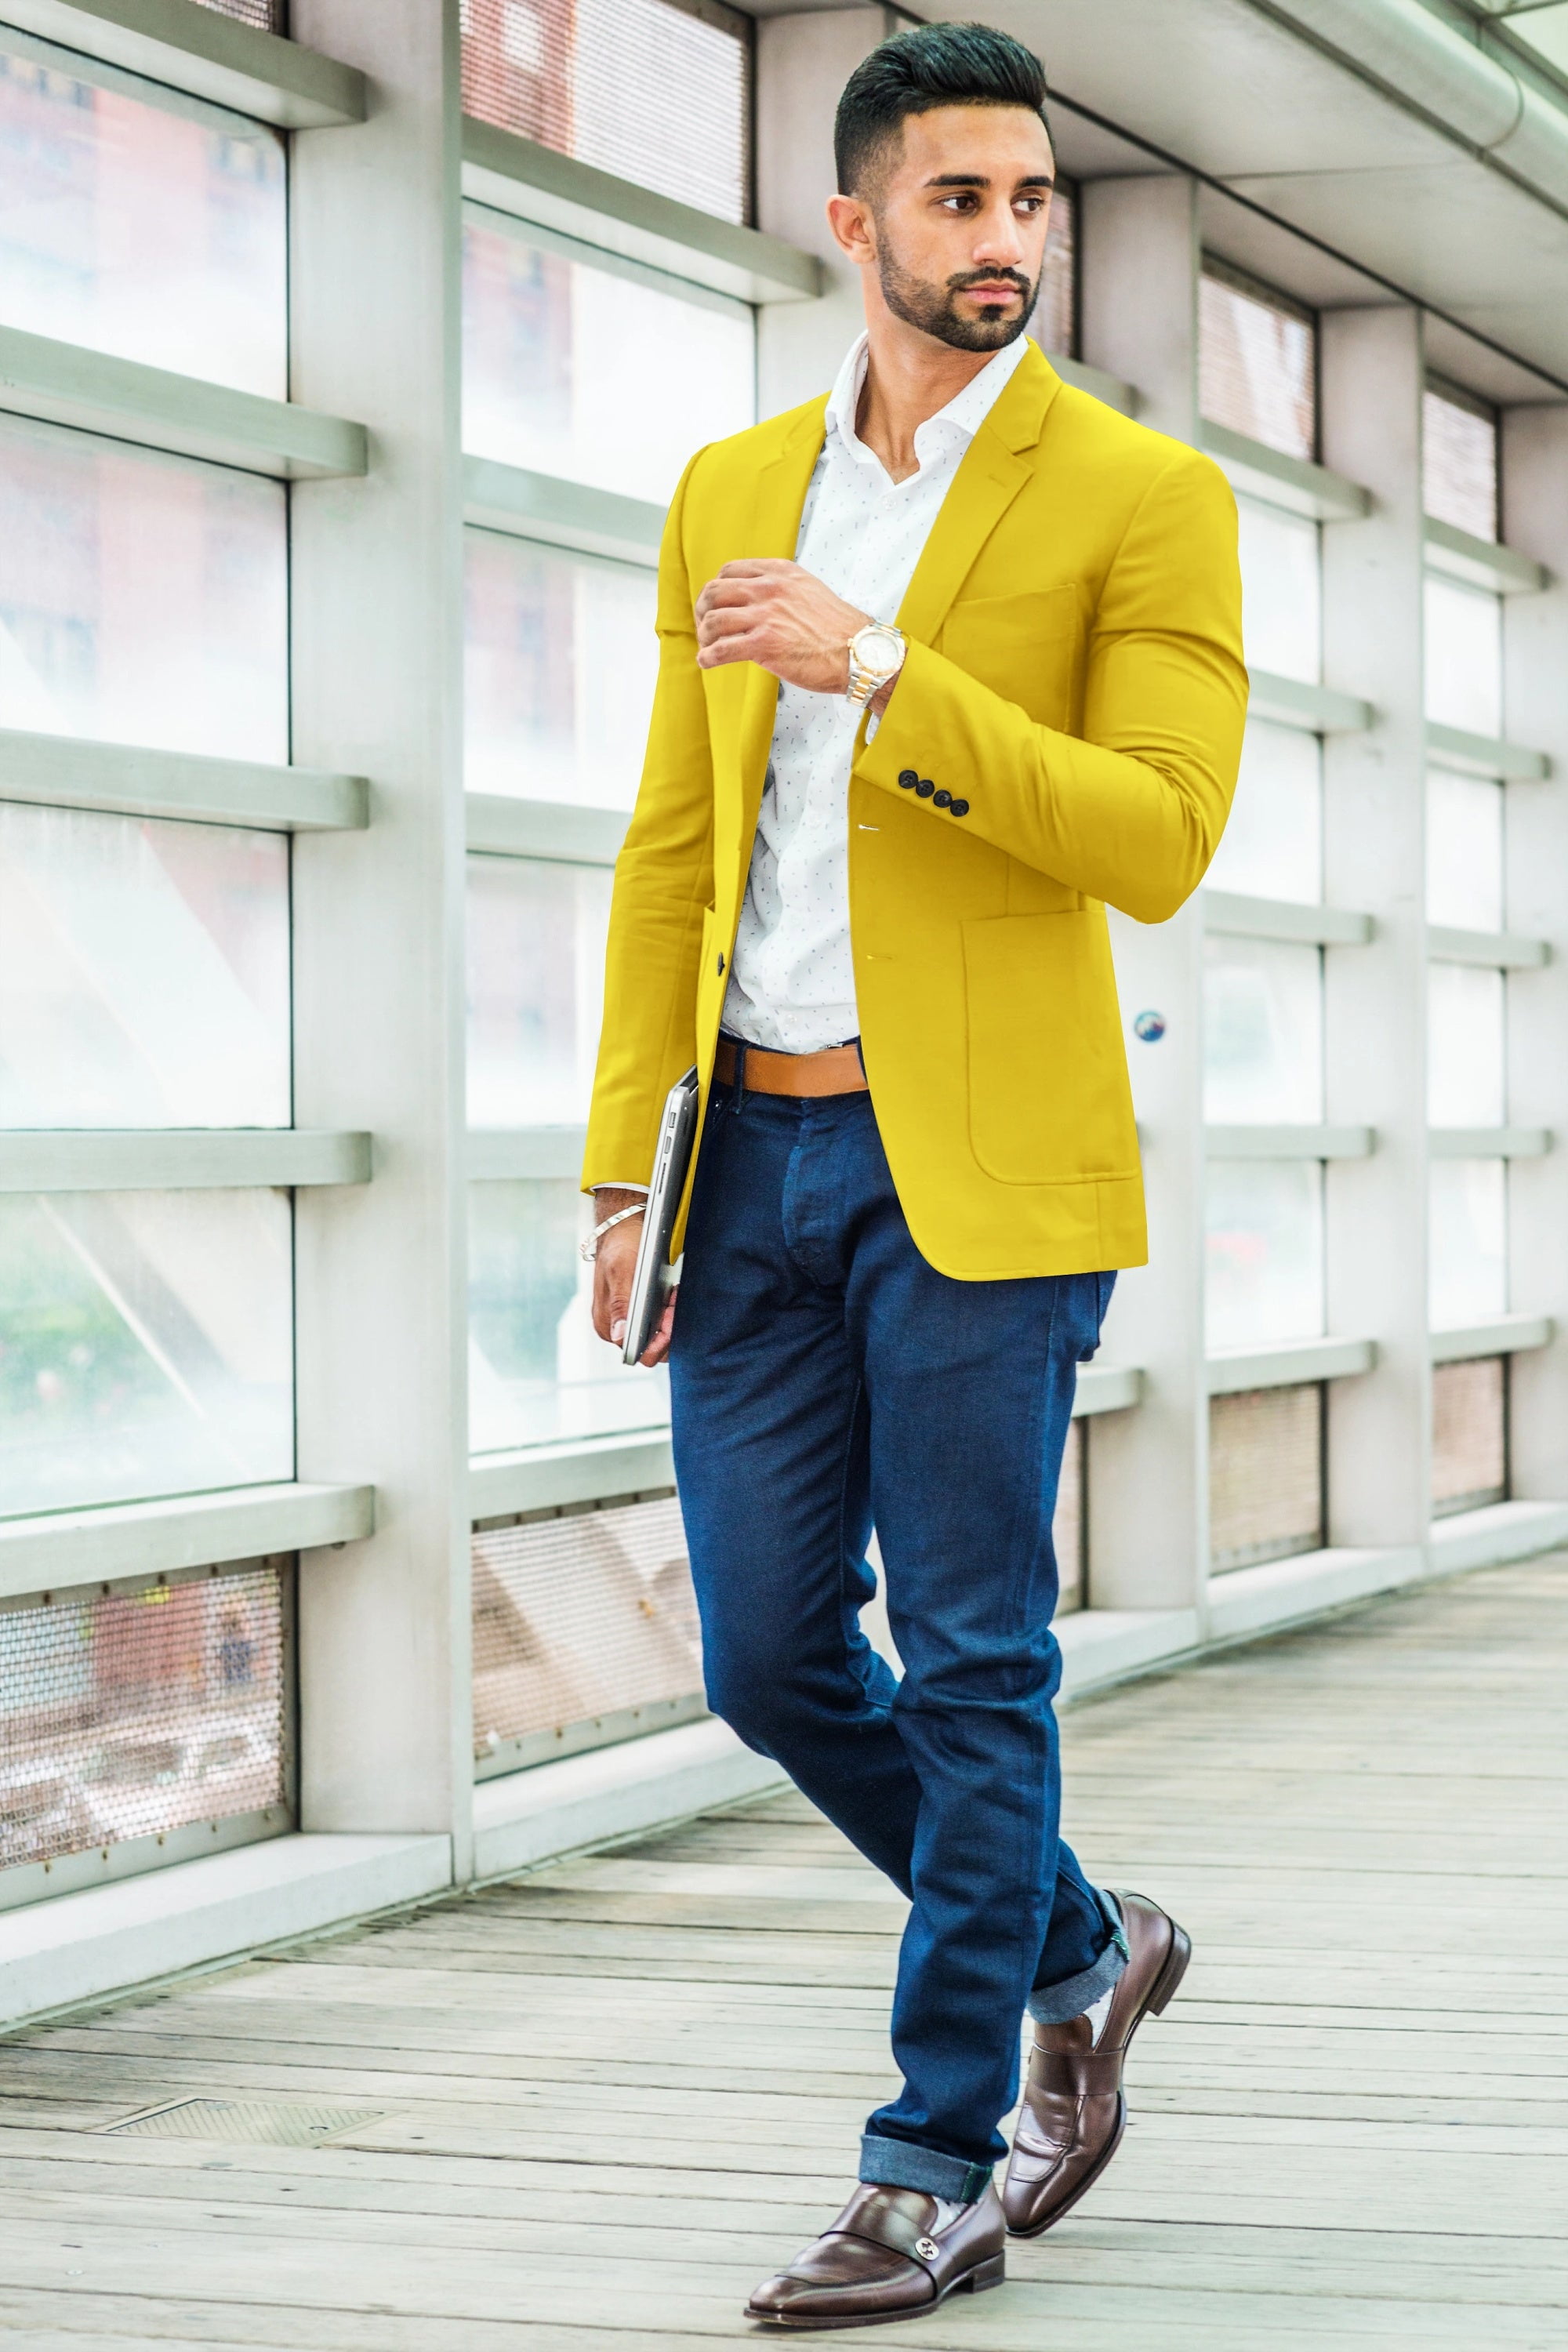 Tan Blazer with Yellow Watch Outfits For Men After 40 (3 ideas